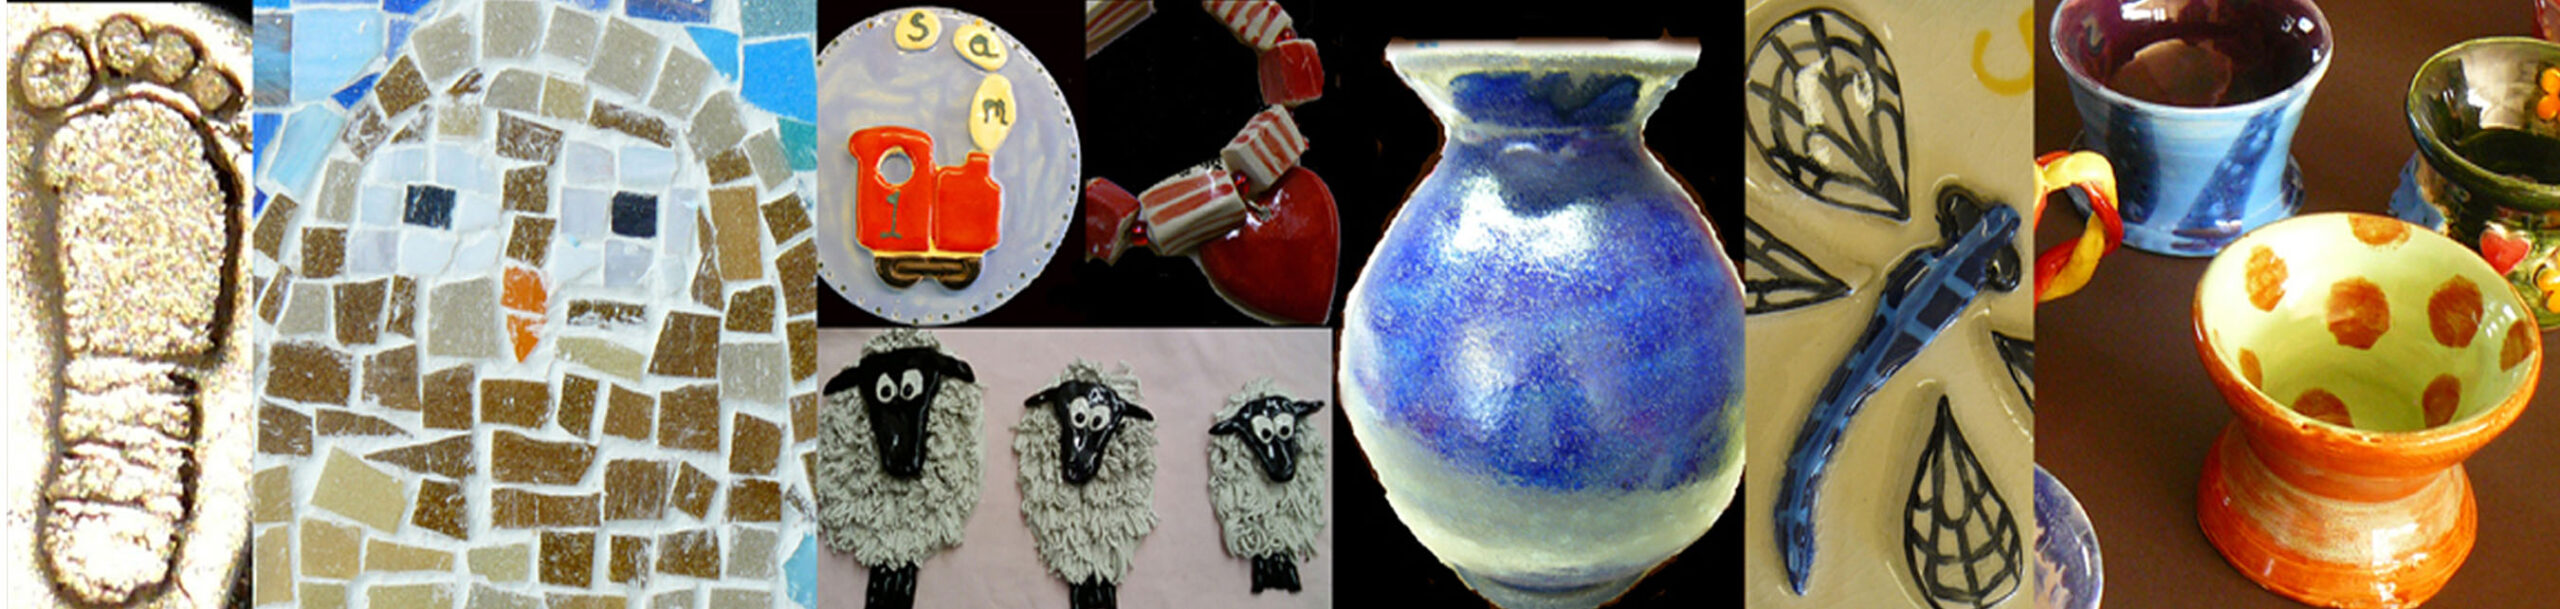 silver clay mosaic train clay ceramic sheep pottery pot dragonfly throw a pot at the studio workshops